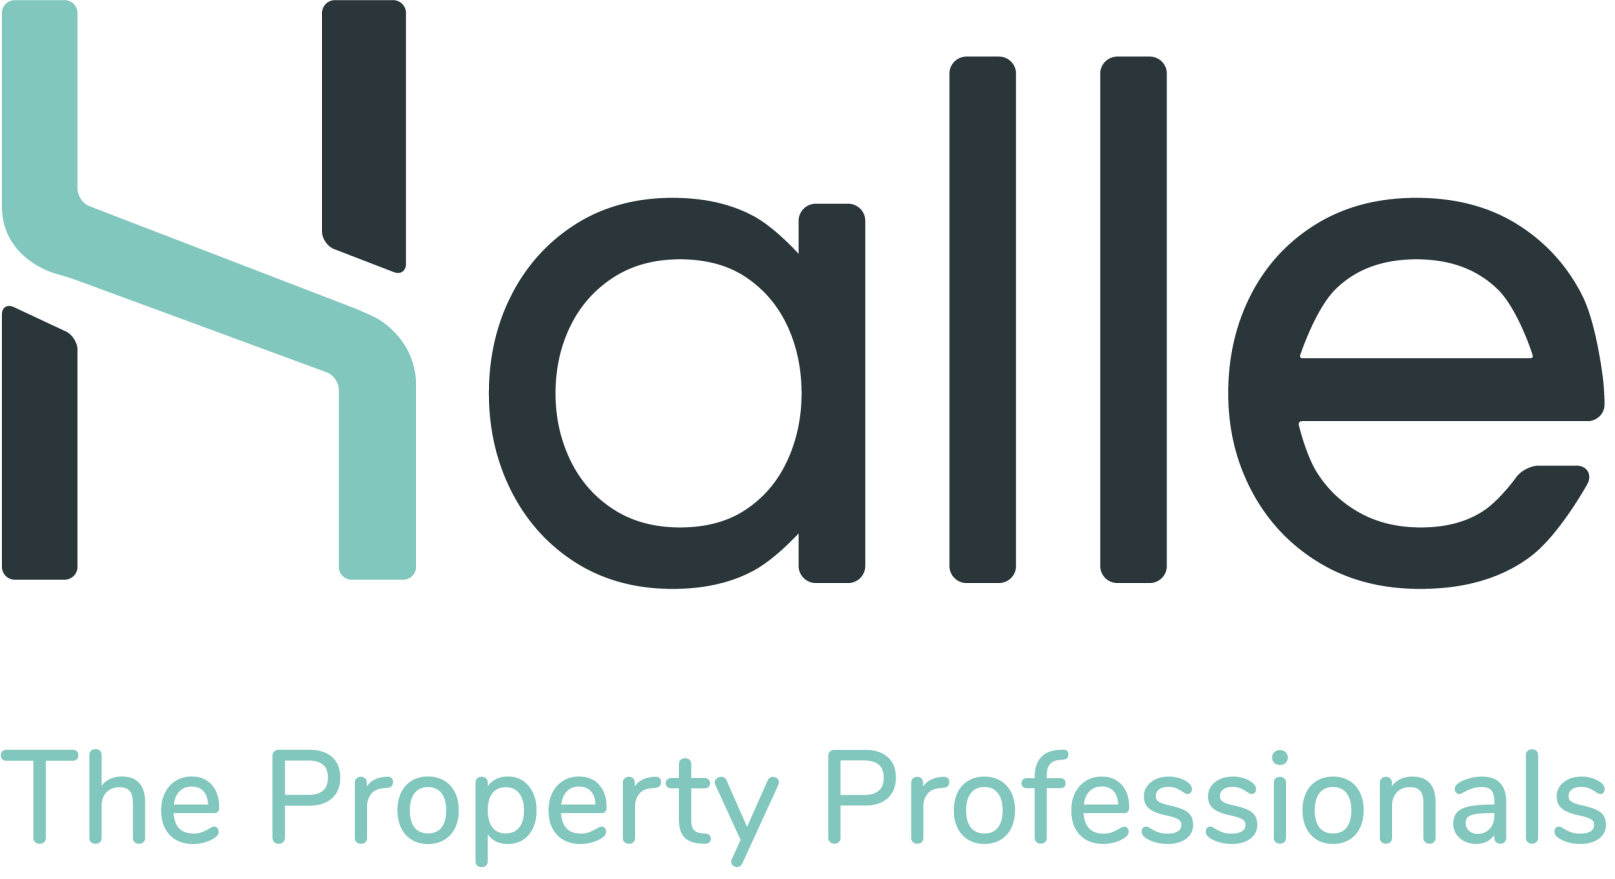 Halle UK - Buying, Selling & Letting a Property or House